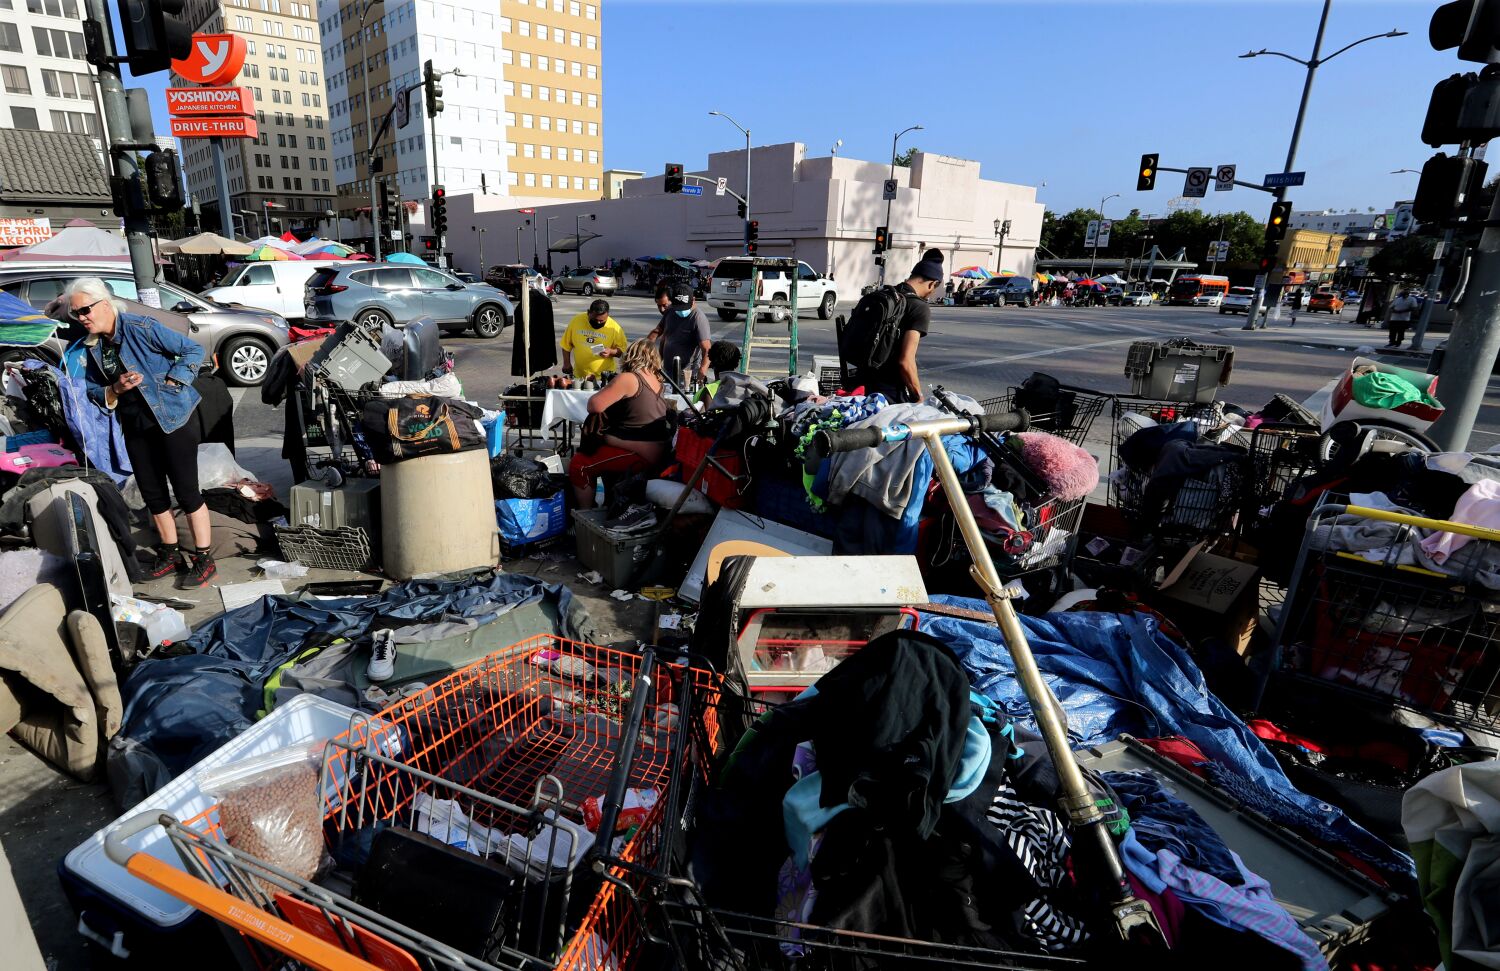 Mobile phones give researchers a deeper look into living homeless in L.A.